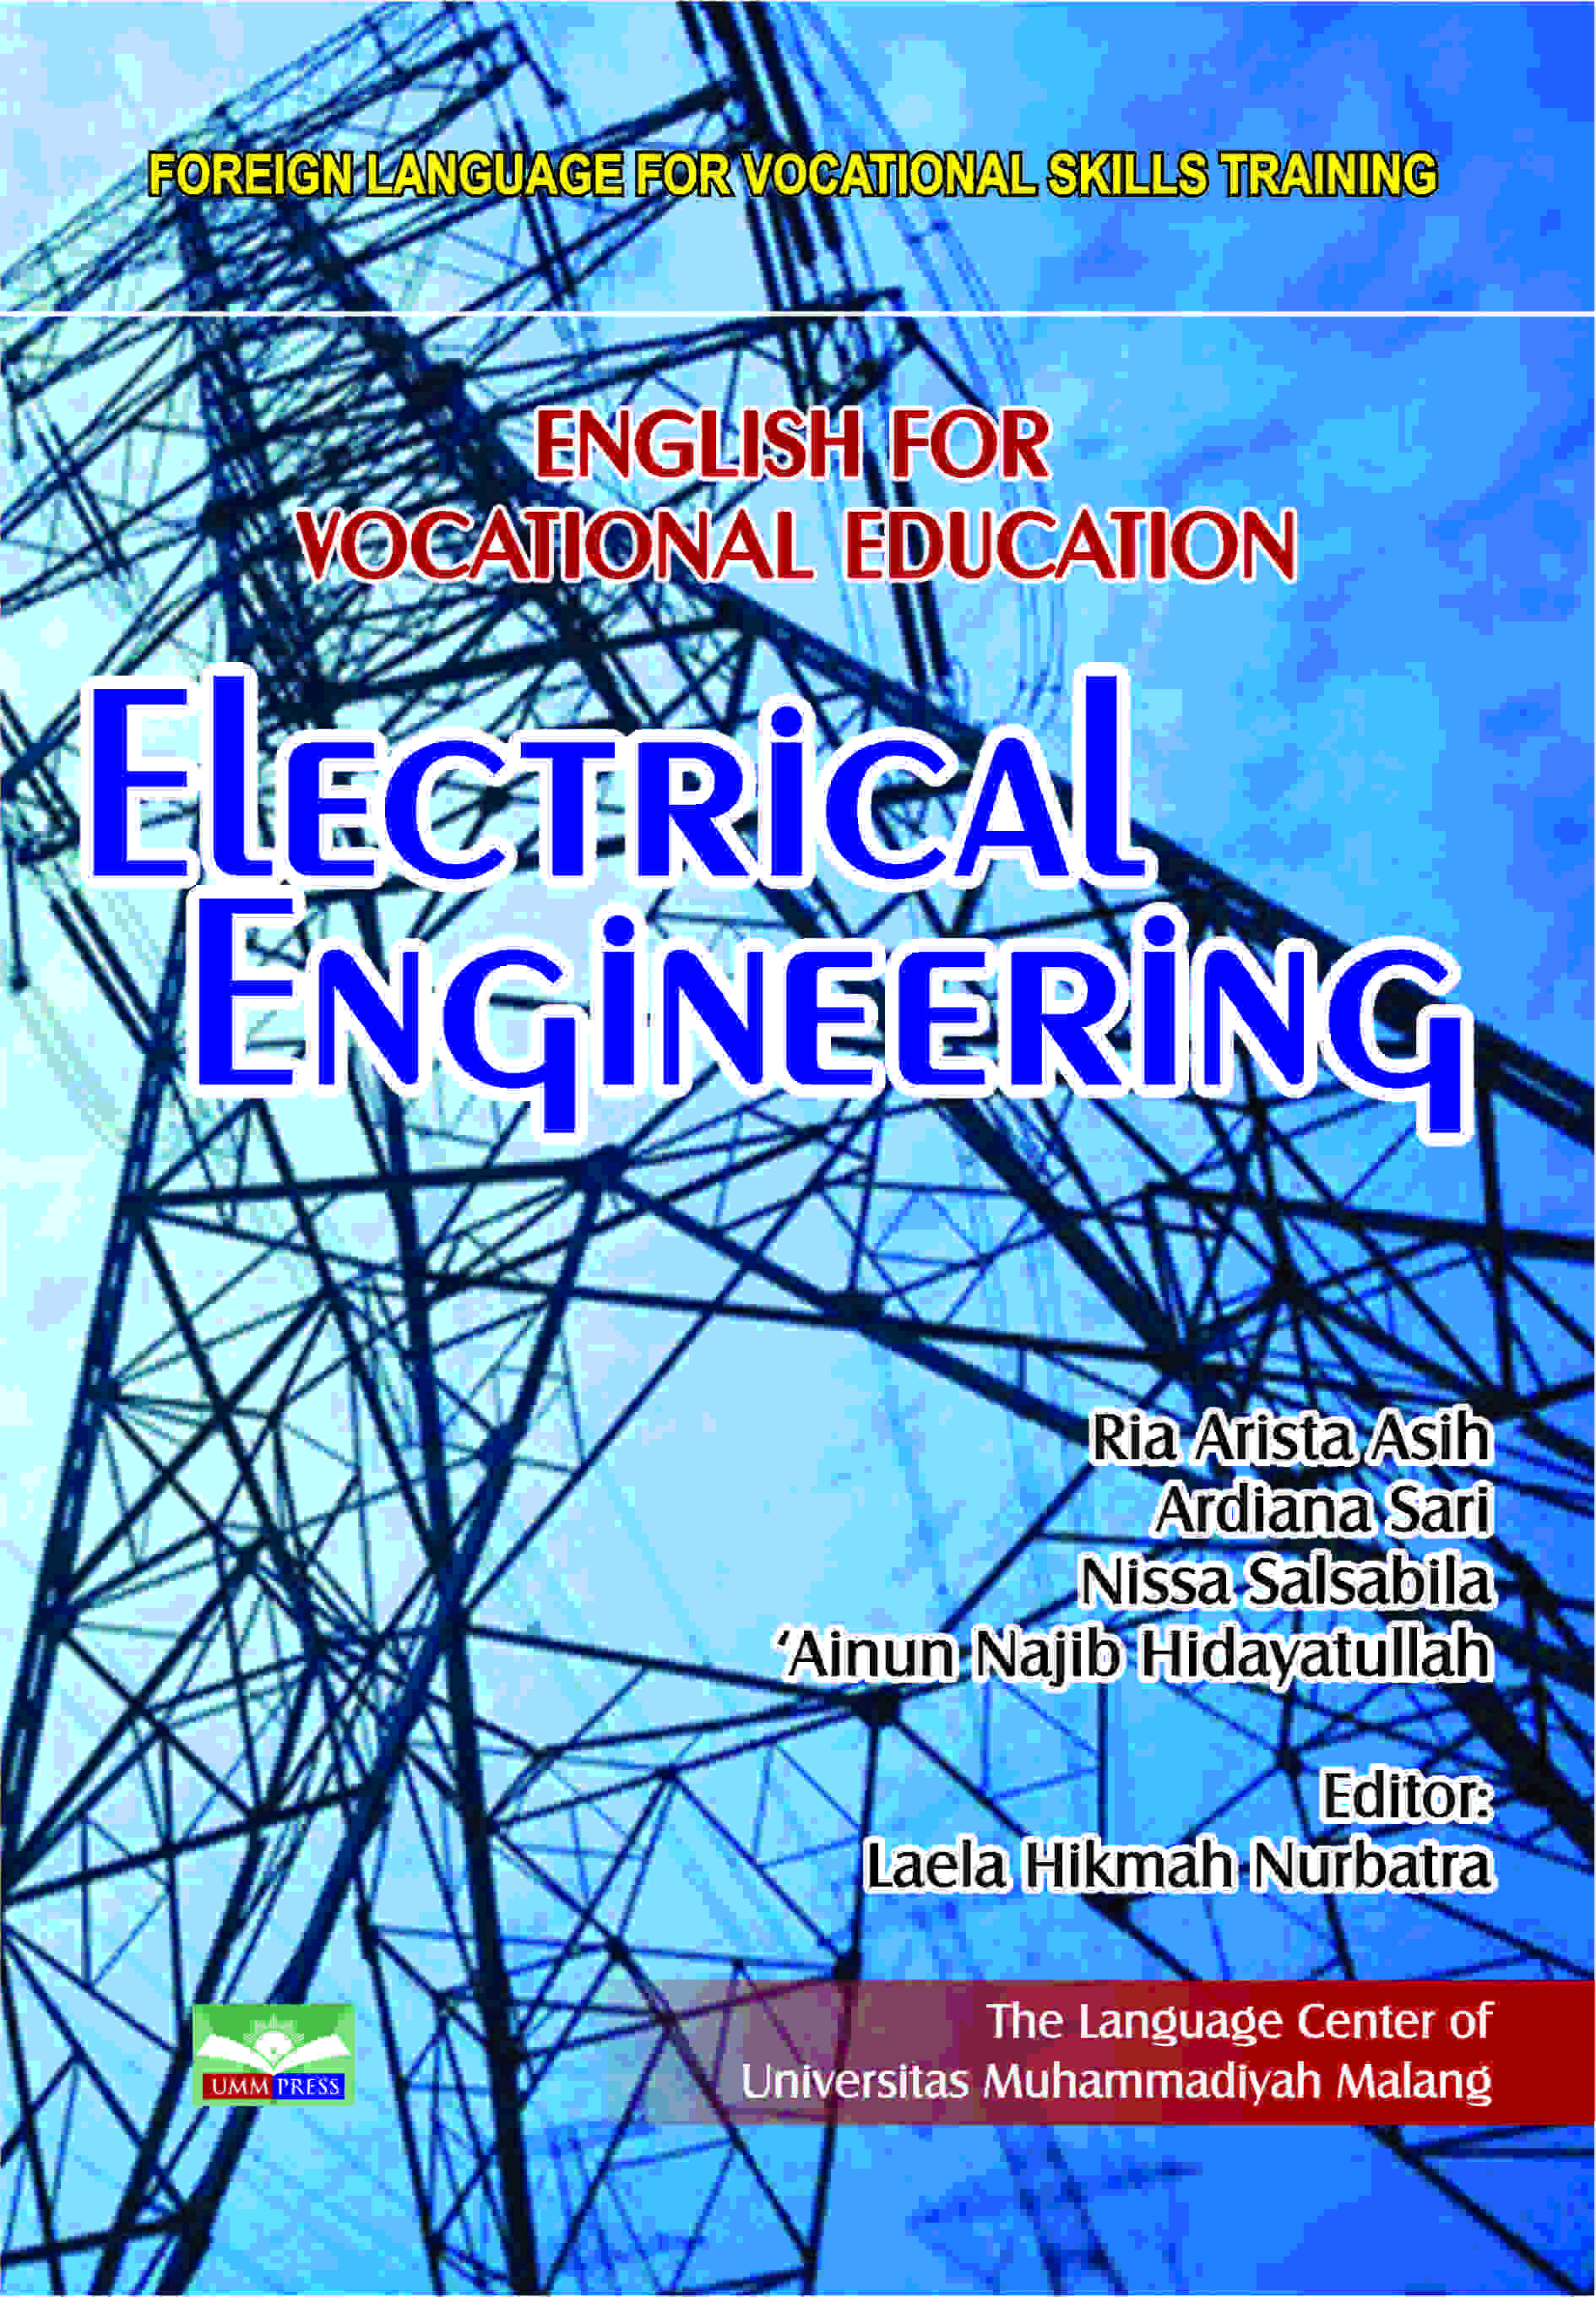 FLVST - ENGLISH FOR VOCATIONAL EDUCATION ELECTRICAL ENGINEERING